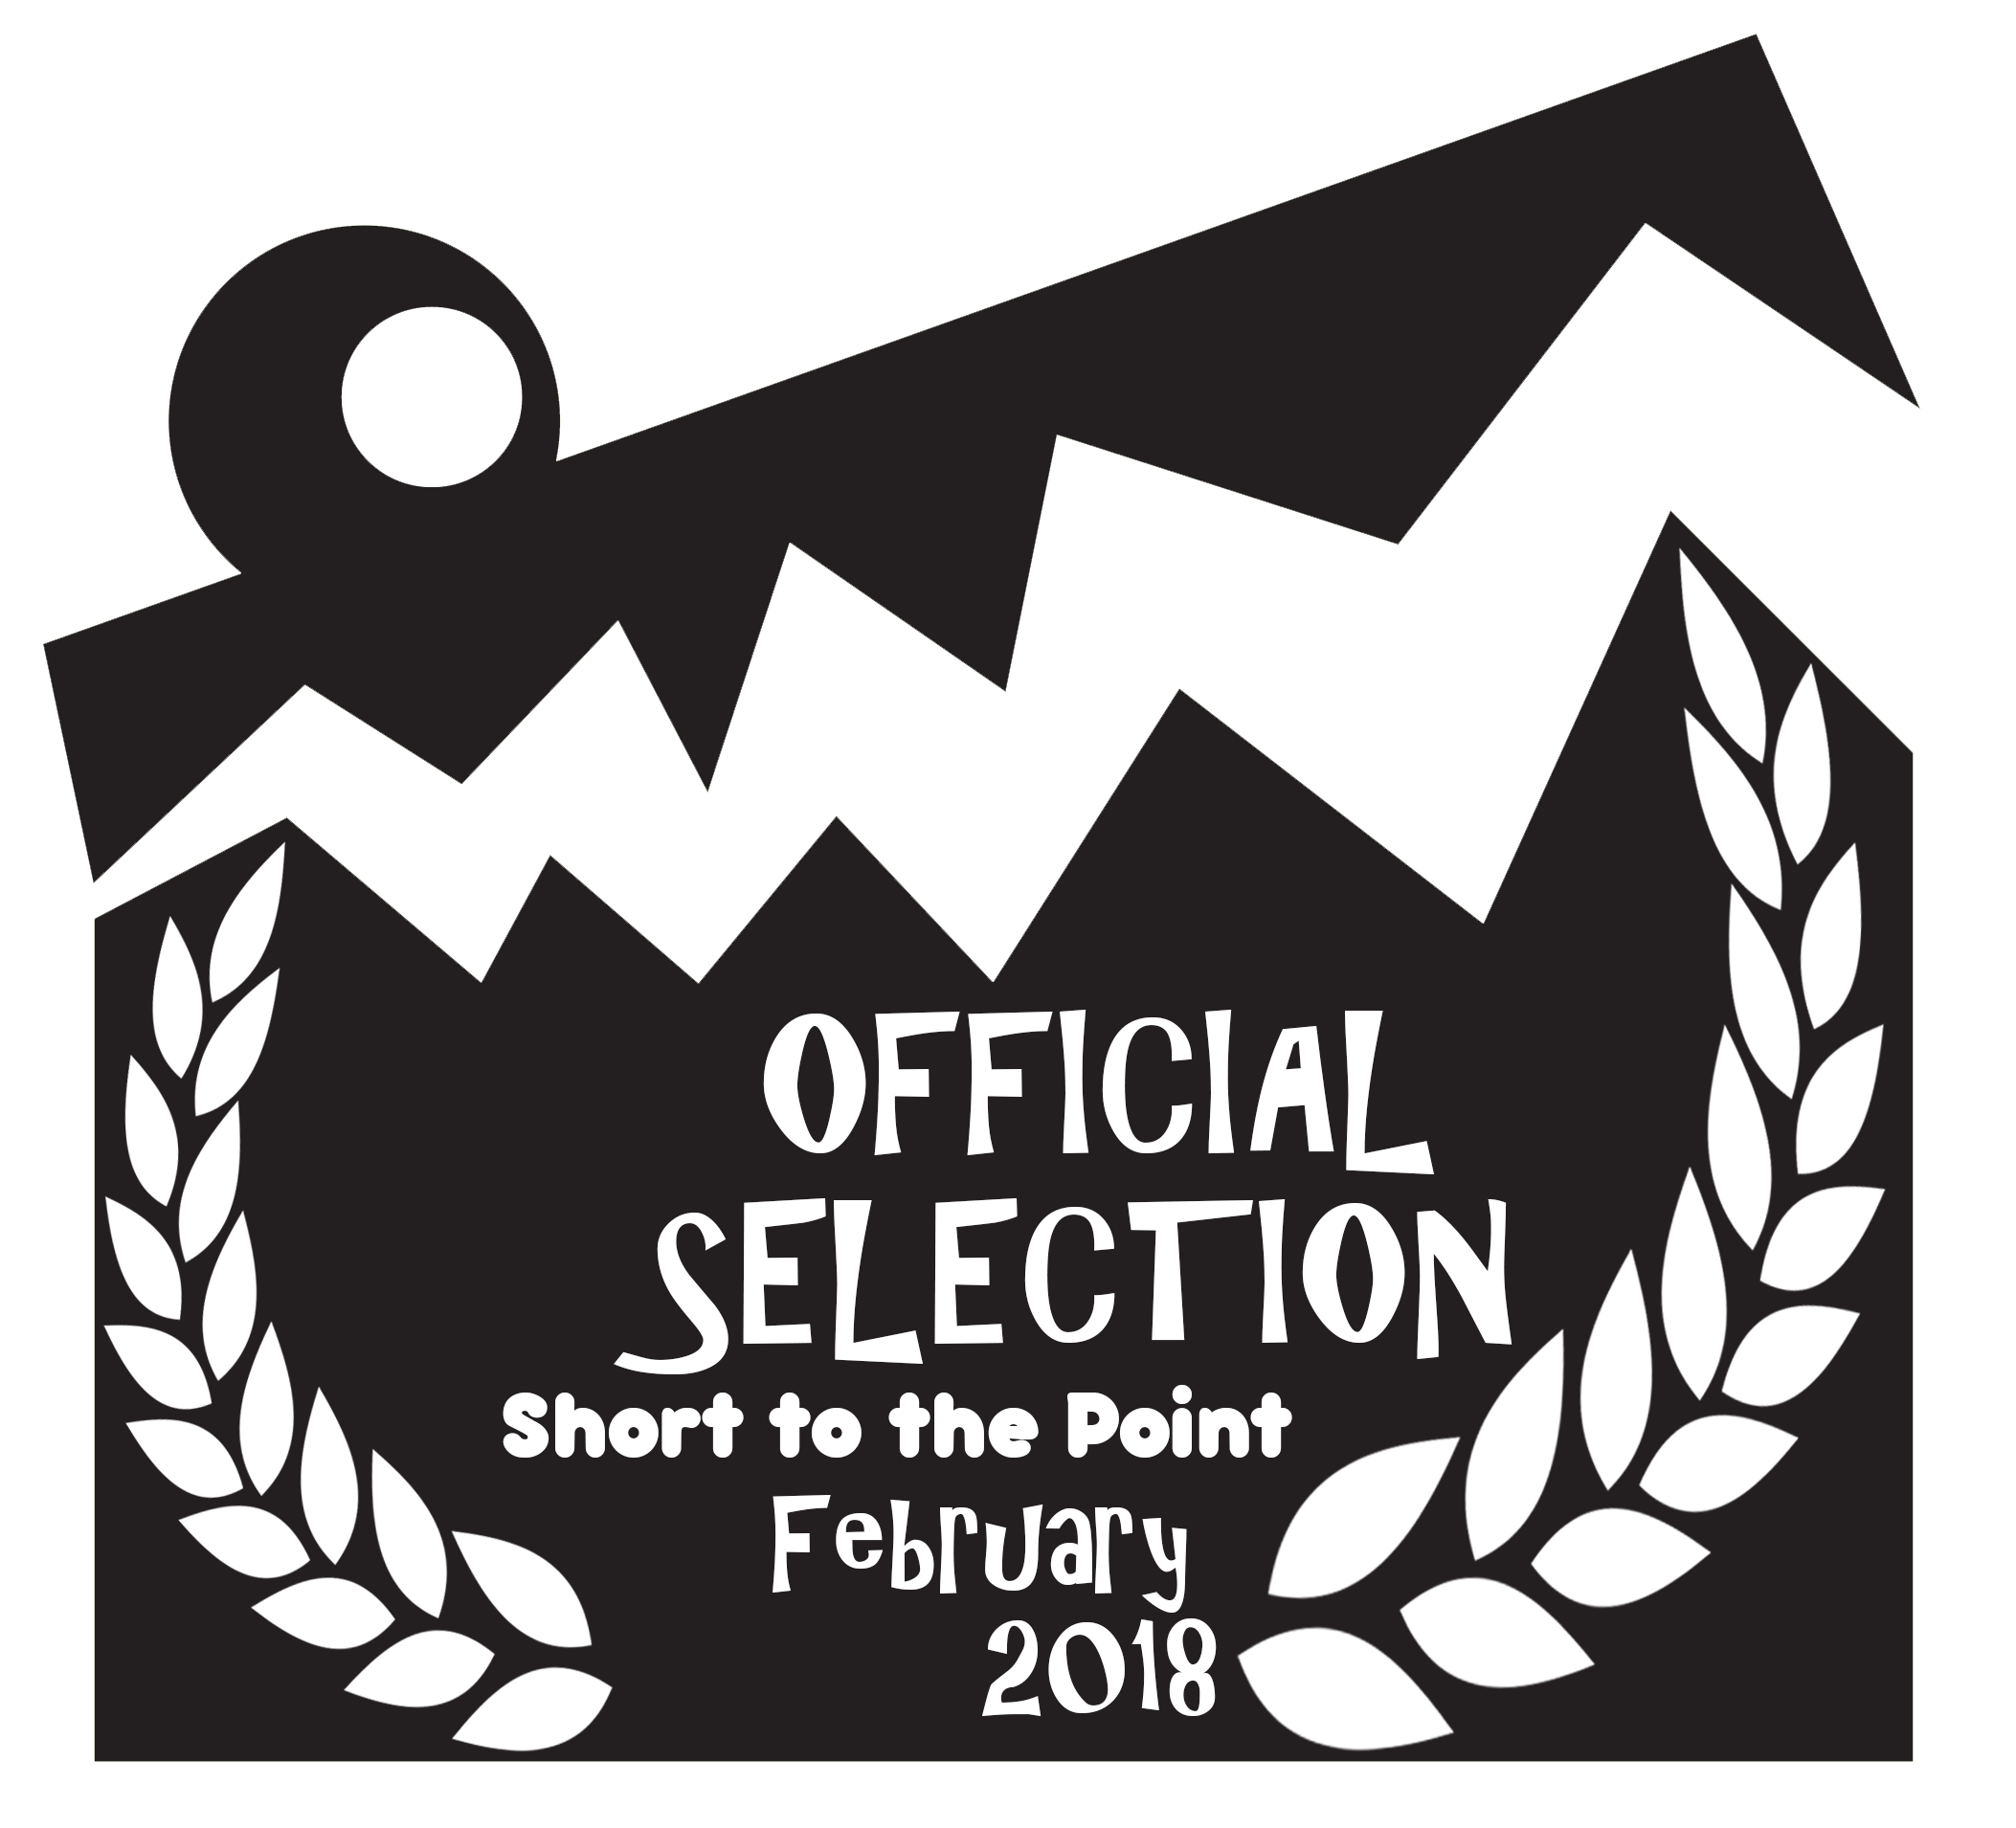 STTP OFFICIAL SELECTION Laurel - February 2018 - Black Crocodile.png